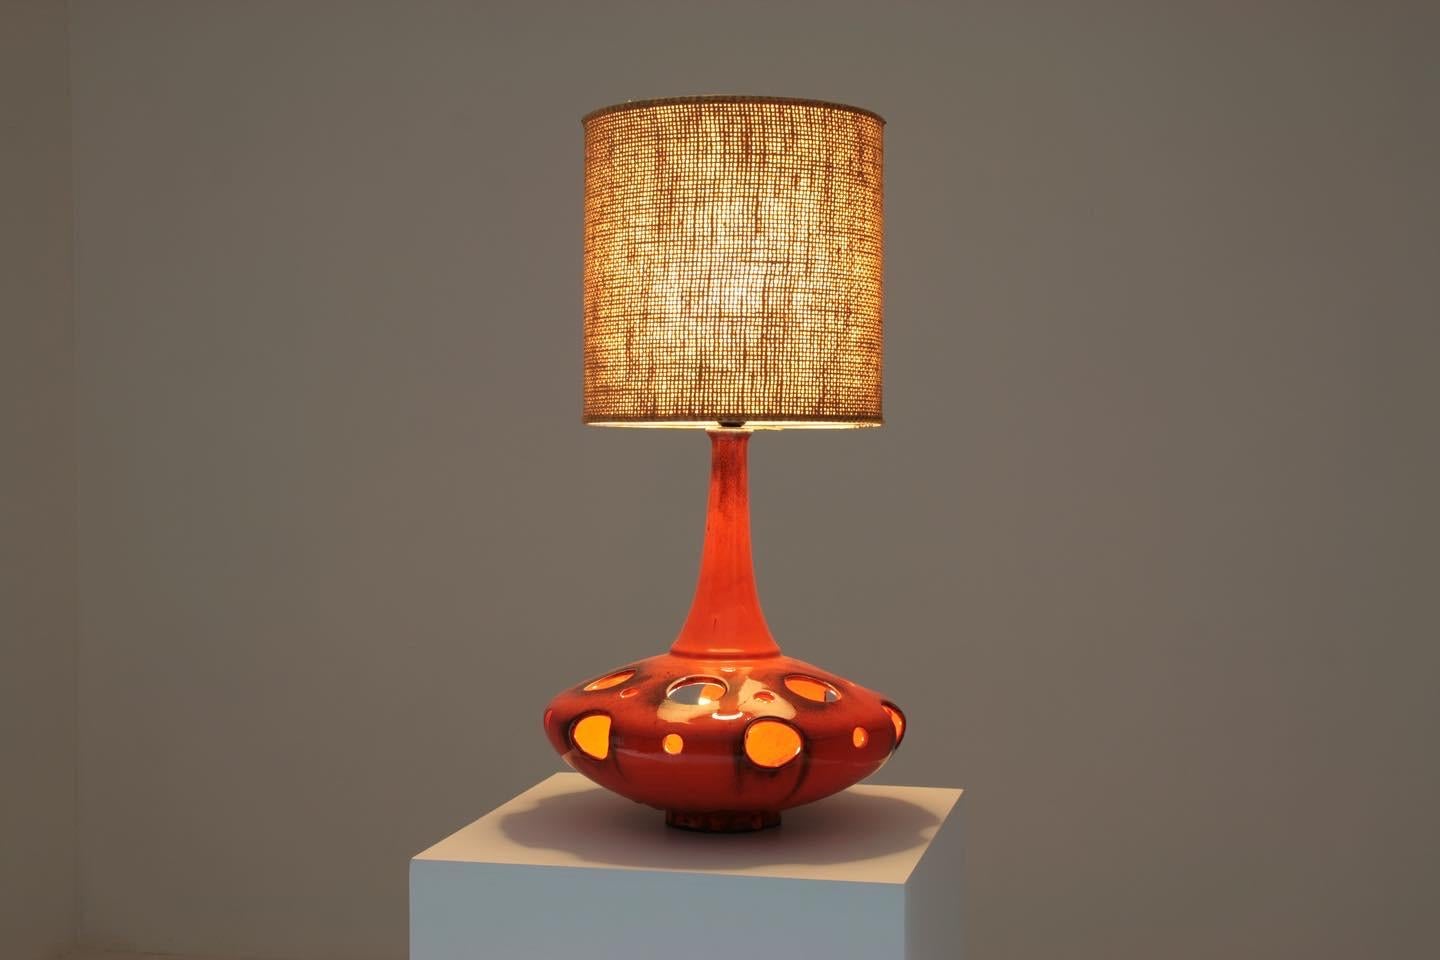 Table lamp with its perforated and illuminated ceramic foot in the shape of a flying saucer dating from the 1970s. lamp foot lights up.
Lamp feet dimensions: diameter 39cm and height 44cm.
Shade dimensions: Diameter 32 cm height 33cm
In very good